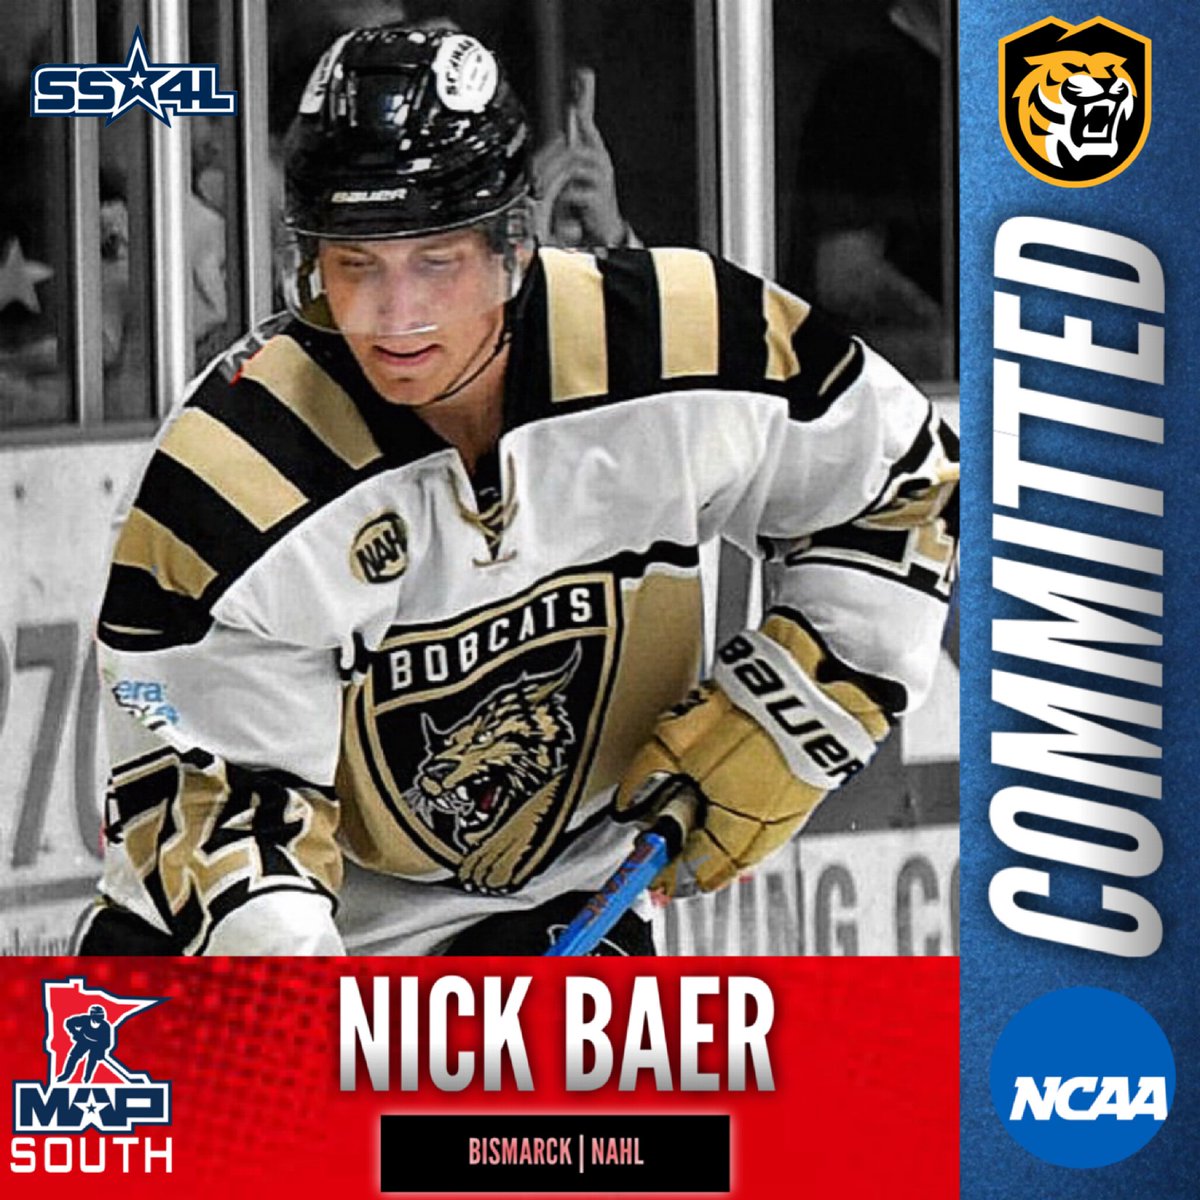 ROLL TIGERS: Congrats to @BismarckBobcats d-man & @TonkaBoysPuck alum @nickbaer24 on his commitment to @CCTigerHKY.🐯 Nick has put years into mastering his craft to earn this opportunity. He will undoubtedly have a massive impact at CC both on the ice & in the locker room. #SS4L